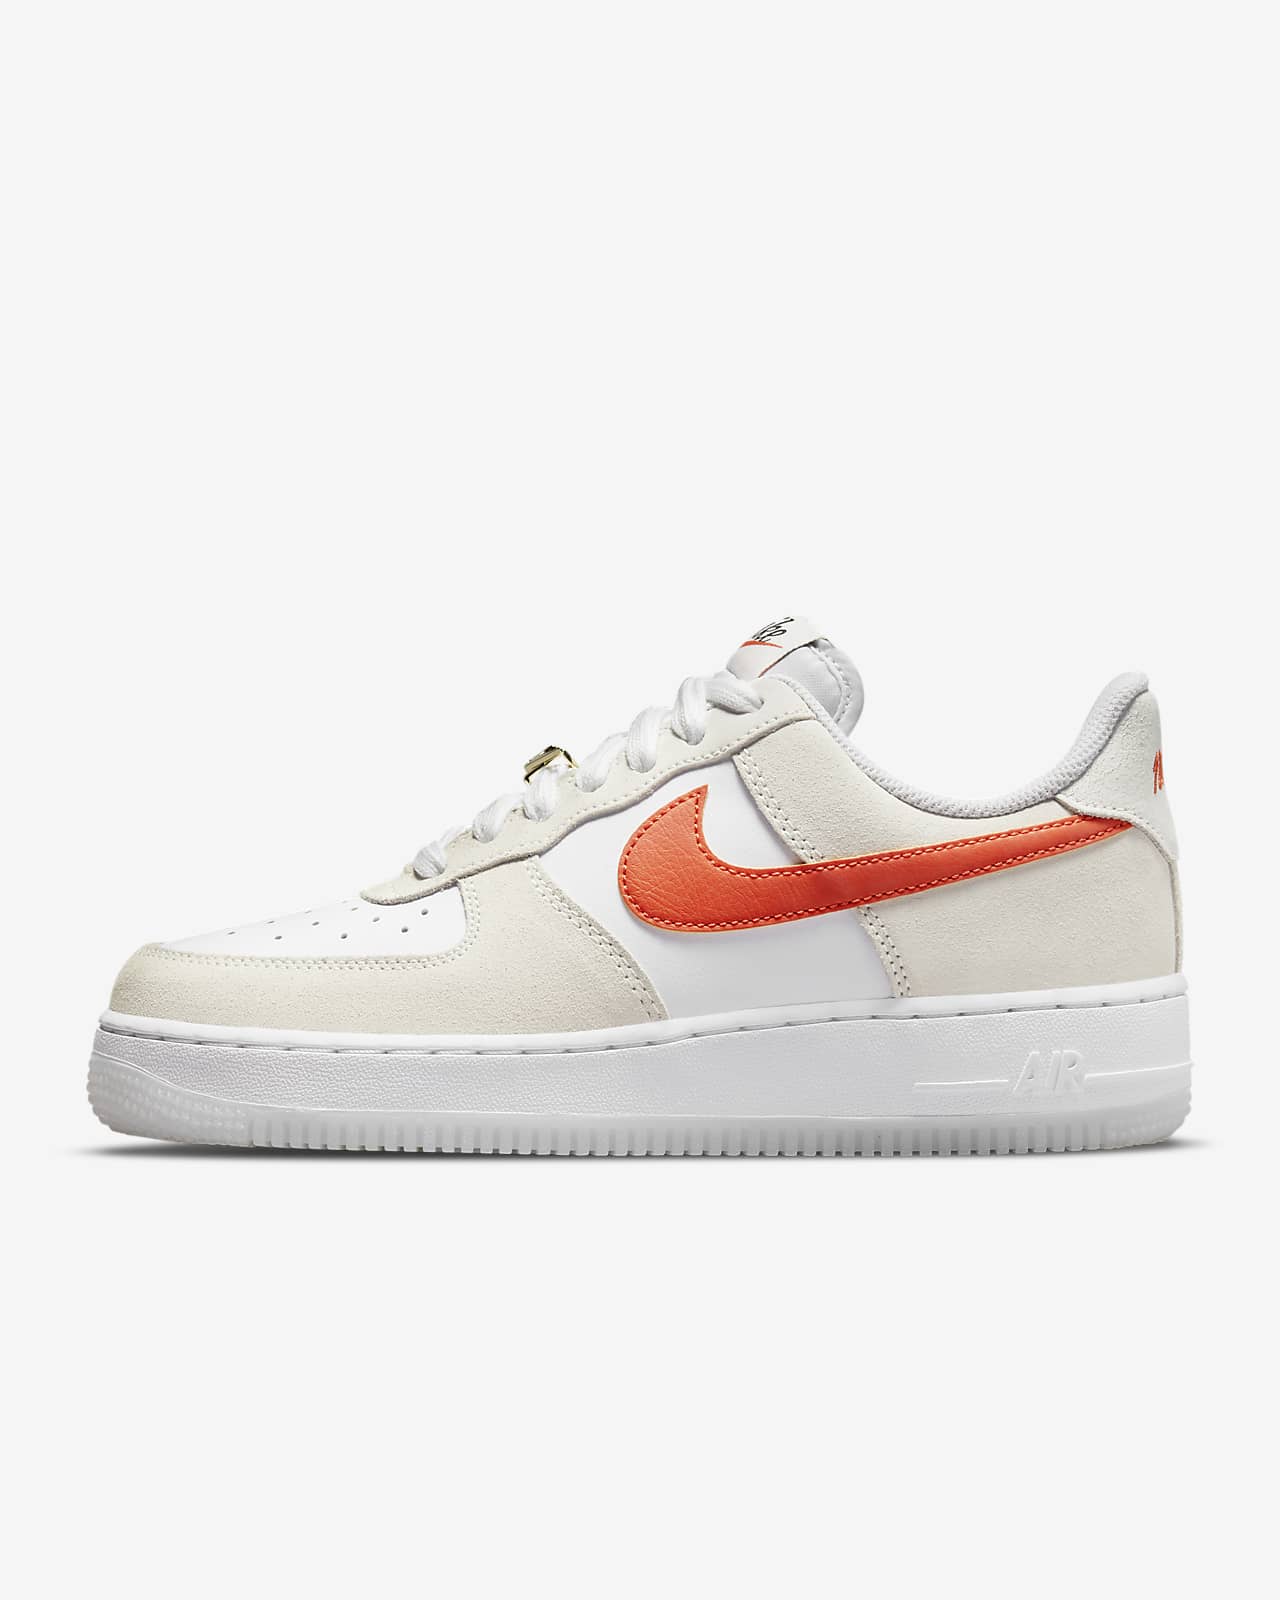 Chaussure Nike Air Force 1 '07 SE pour Femme. Nike CA